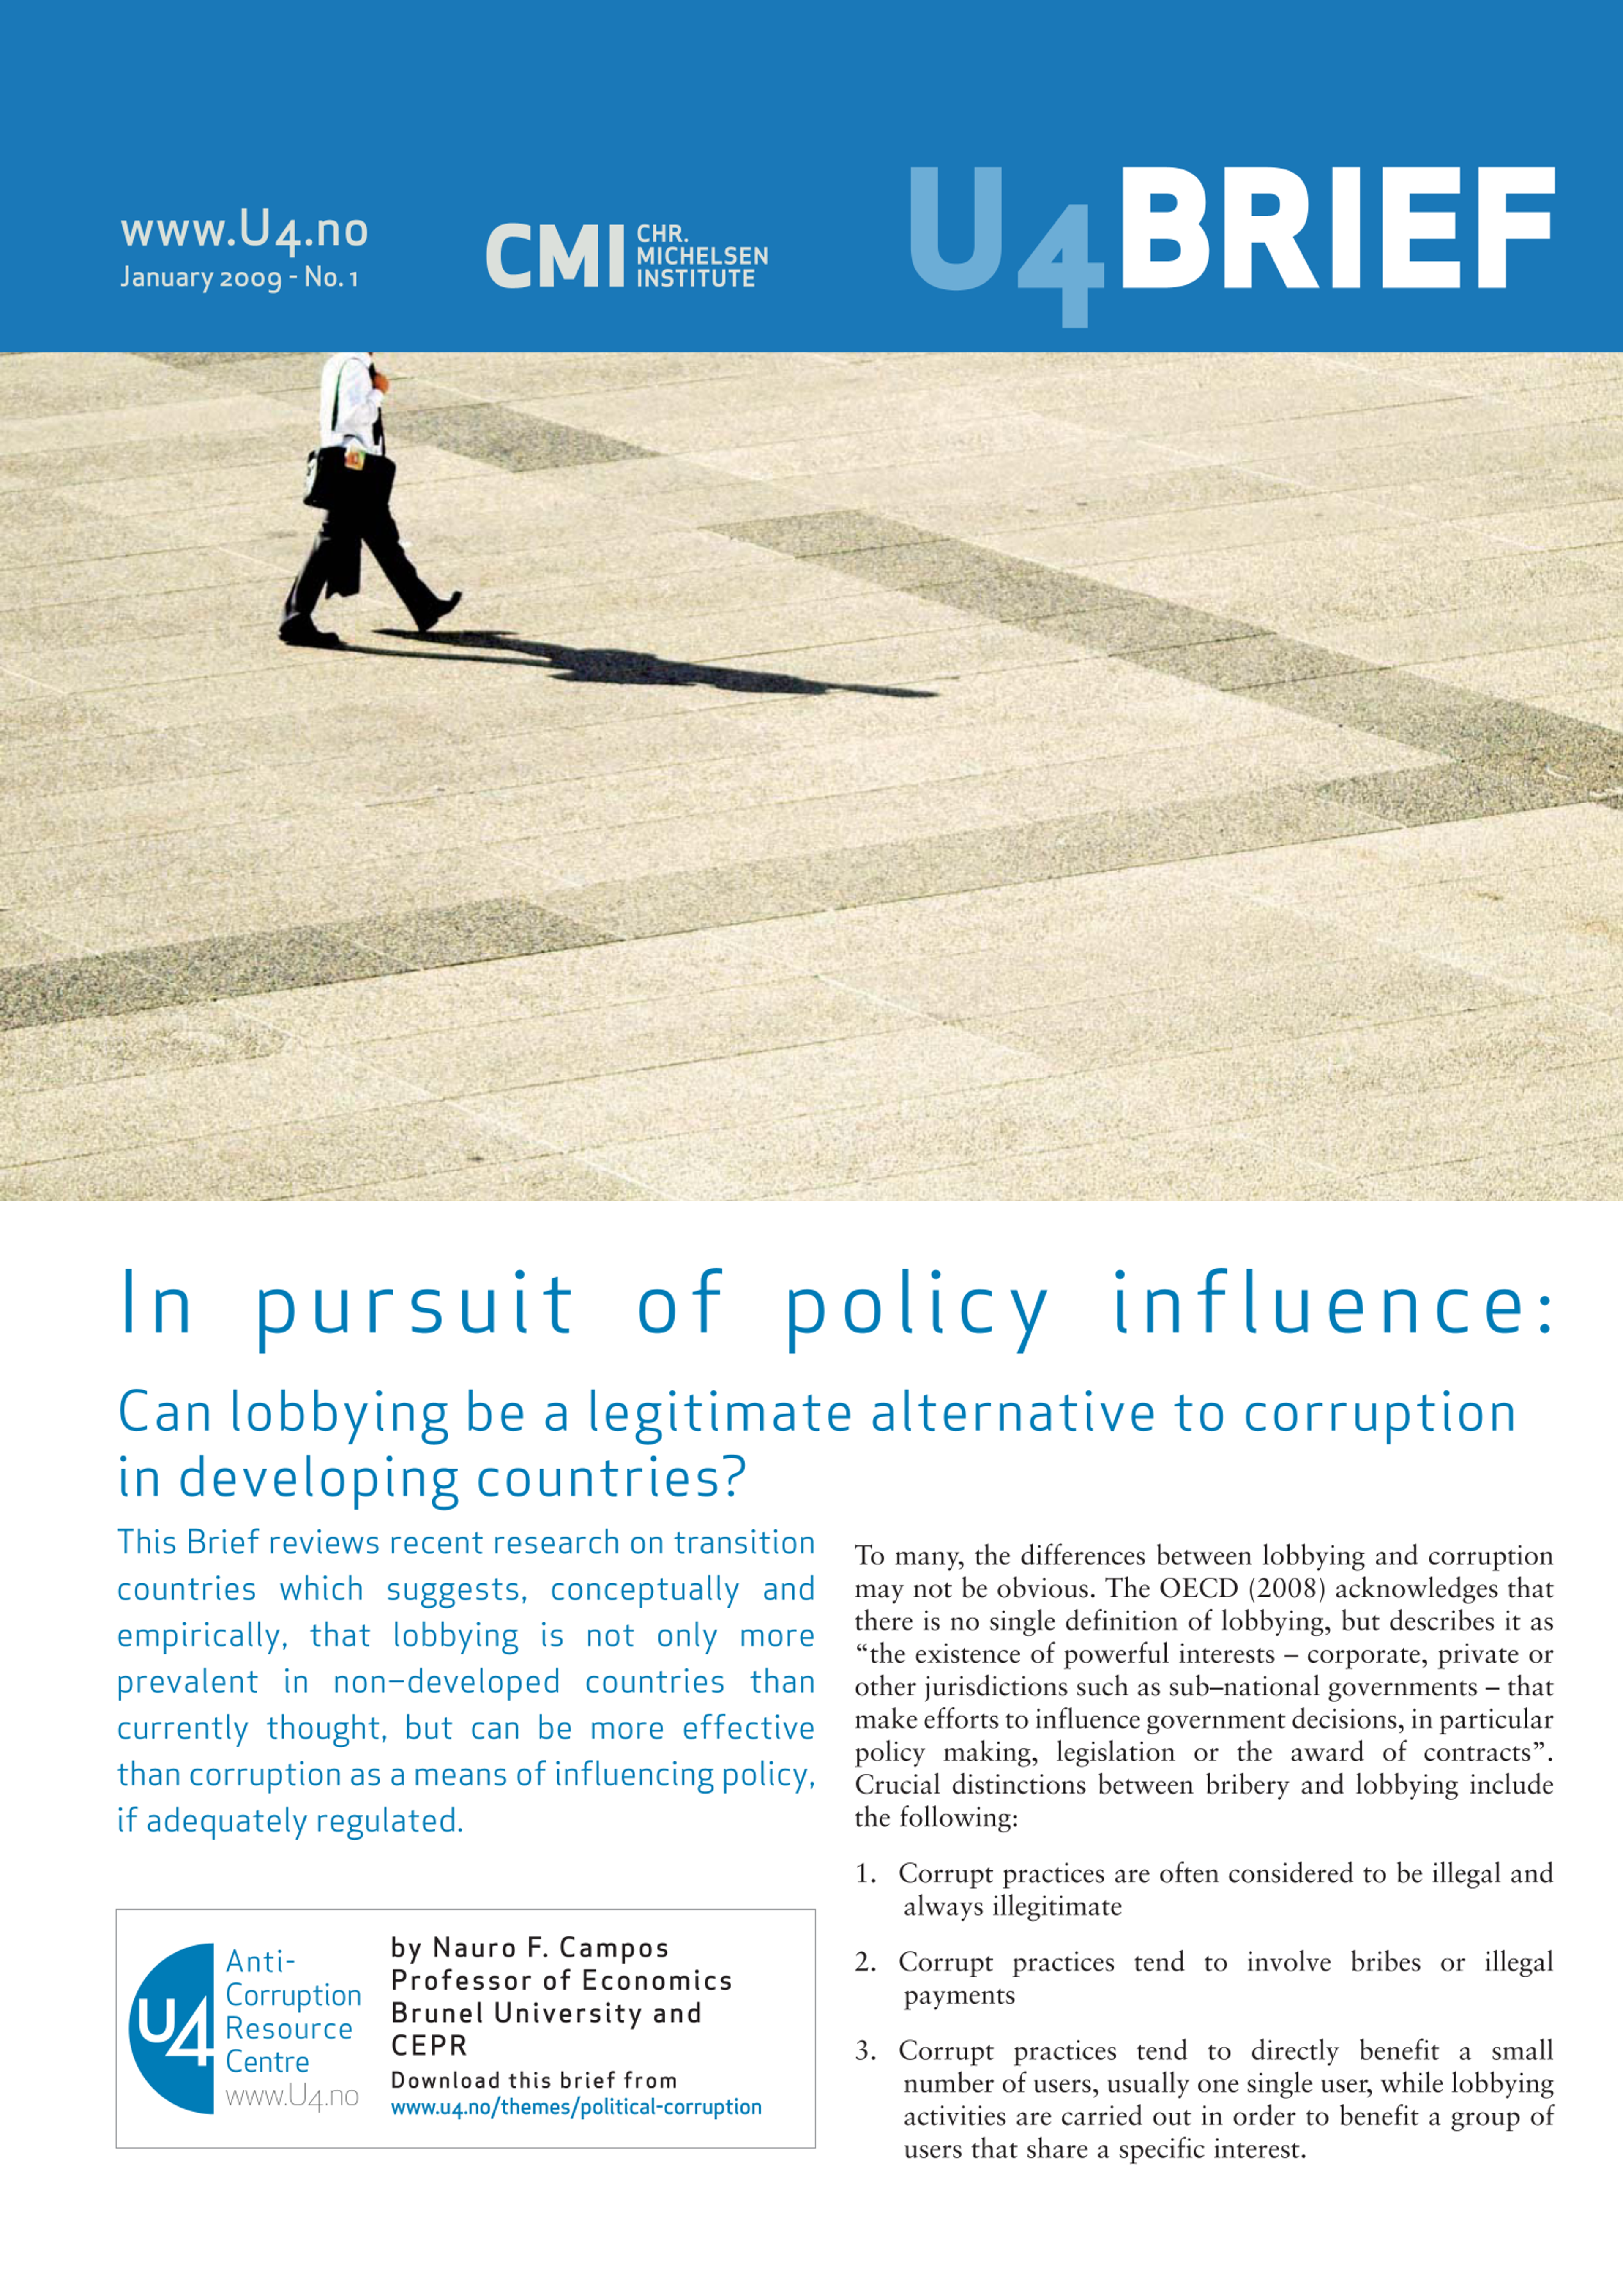 In pursuit of policy influence: Can lobbying be a legitimate alternative to corruption in developing countries?